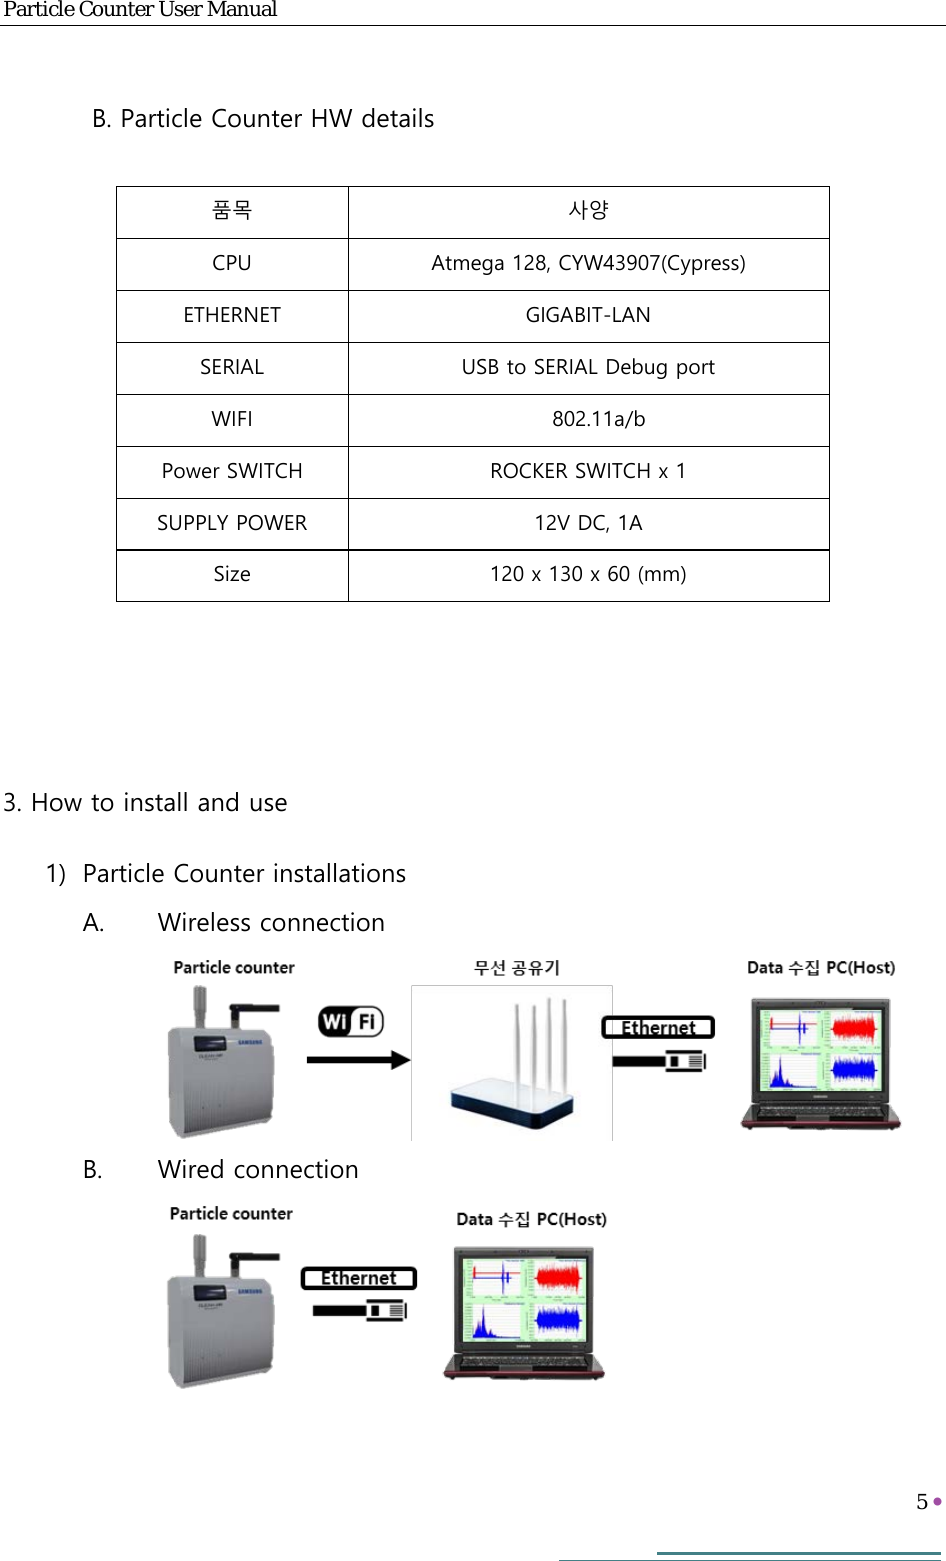 Particle Counter User Manual   5      B. Particle Counter HW details          3. How to install and use 1) Particle Counter installations A. Wireless connection  B. Wired connection            품목 사양 CPU Atmega 128, CYW43907(Cypress) ETHERNET GIGABIT-LAN SERIAL USB to SERIAL Debug port WIFI 802.11a/b Power SWITCH ROCKER SWITCH x 1 SUPPLY POWER 12V DC, 1A Size 120 x 130 x 60 (mm) 